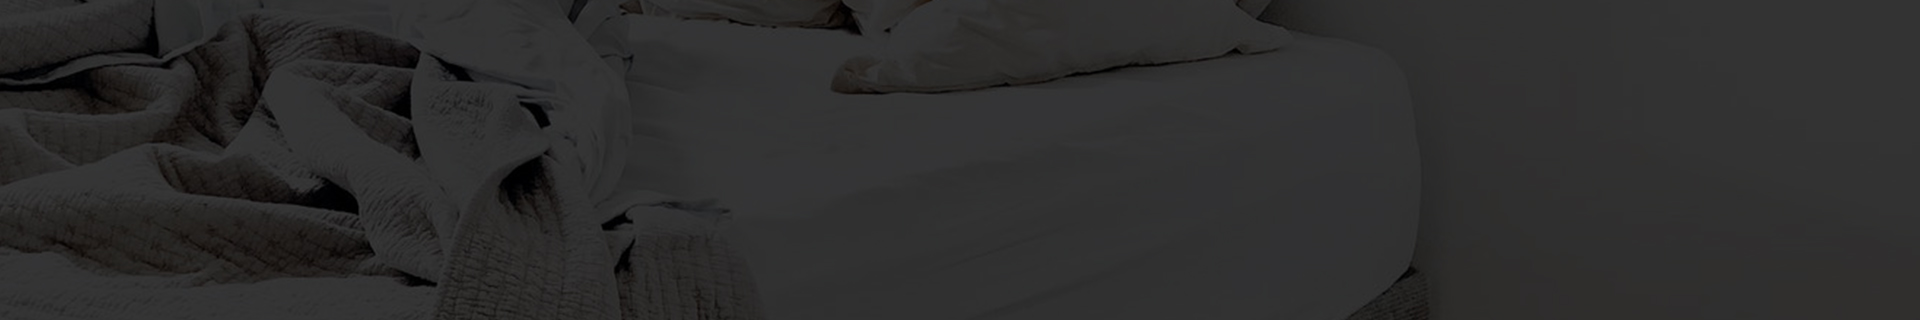 electric beds-banner